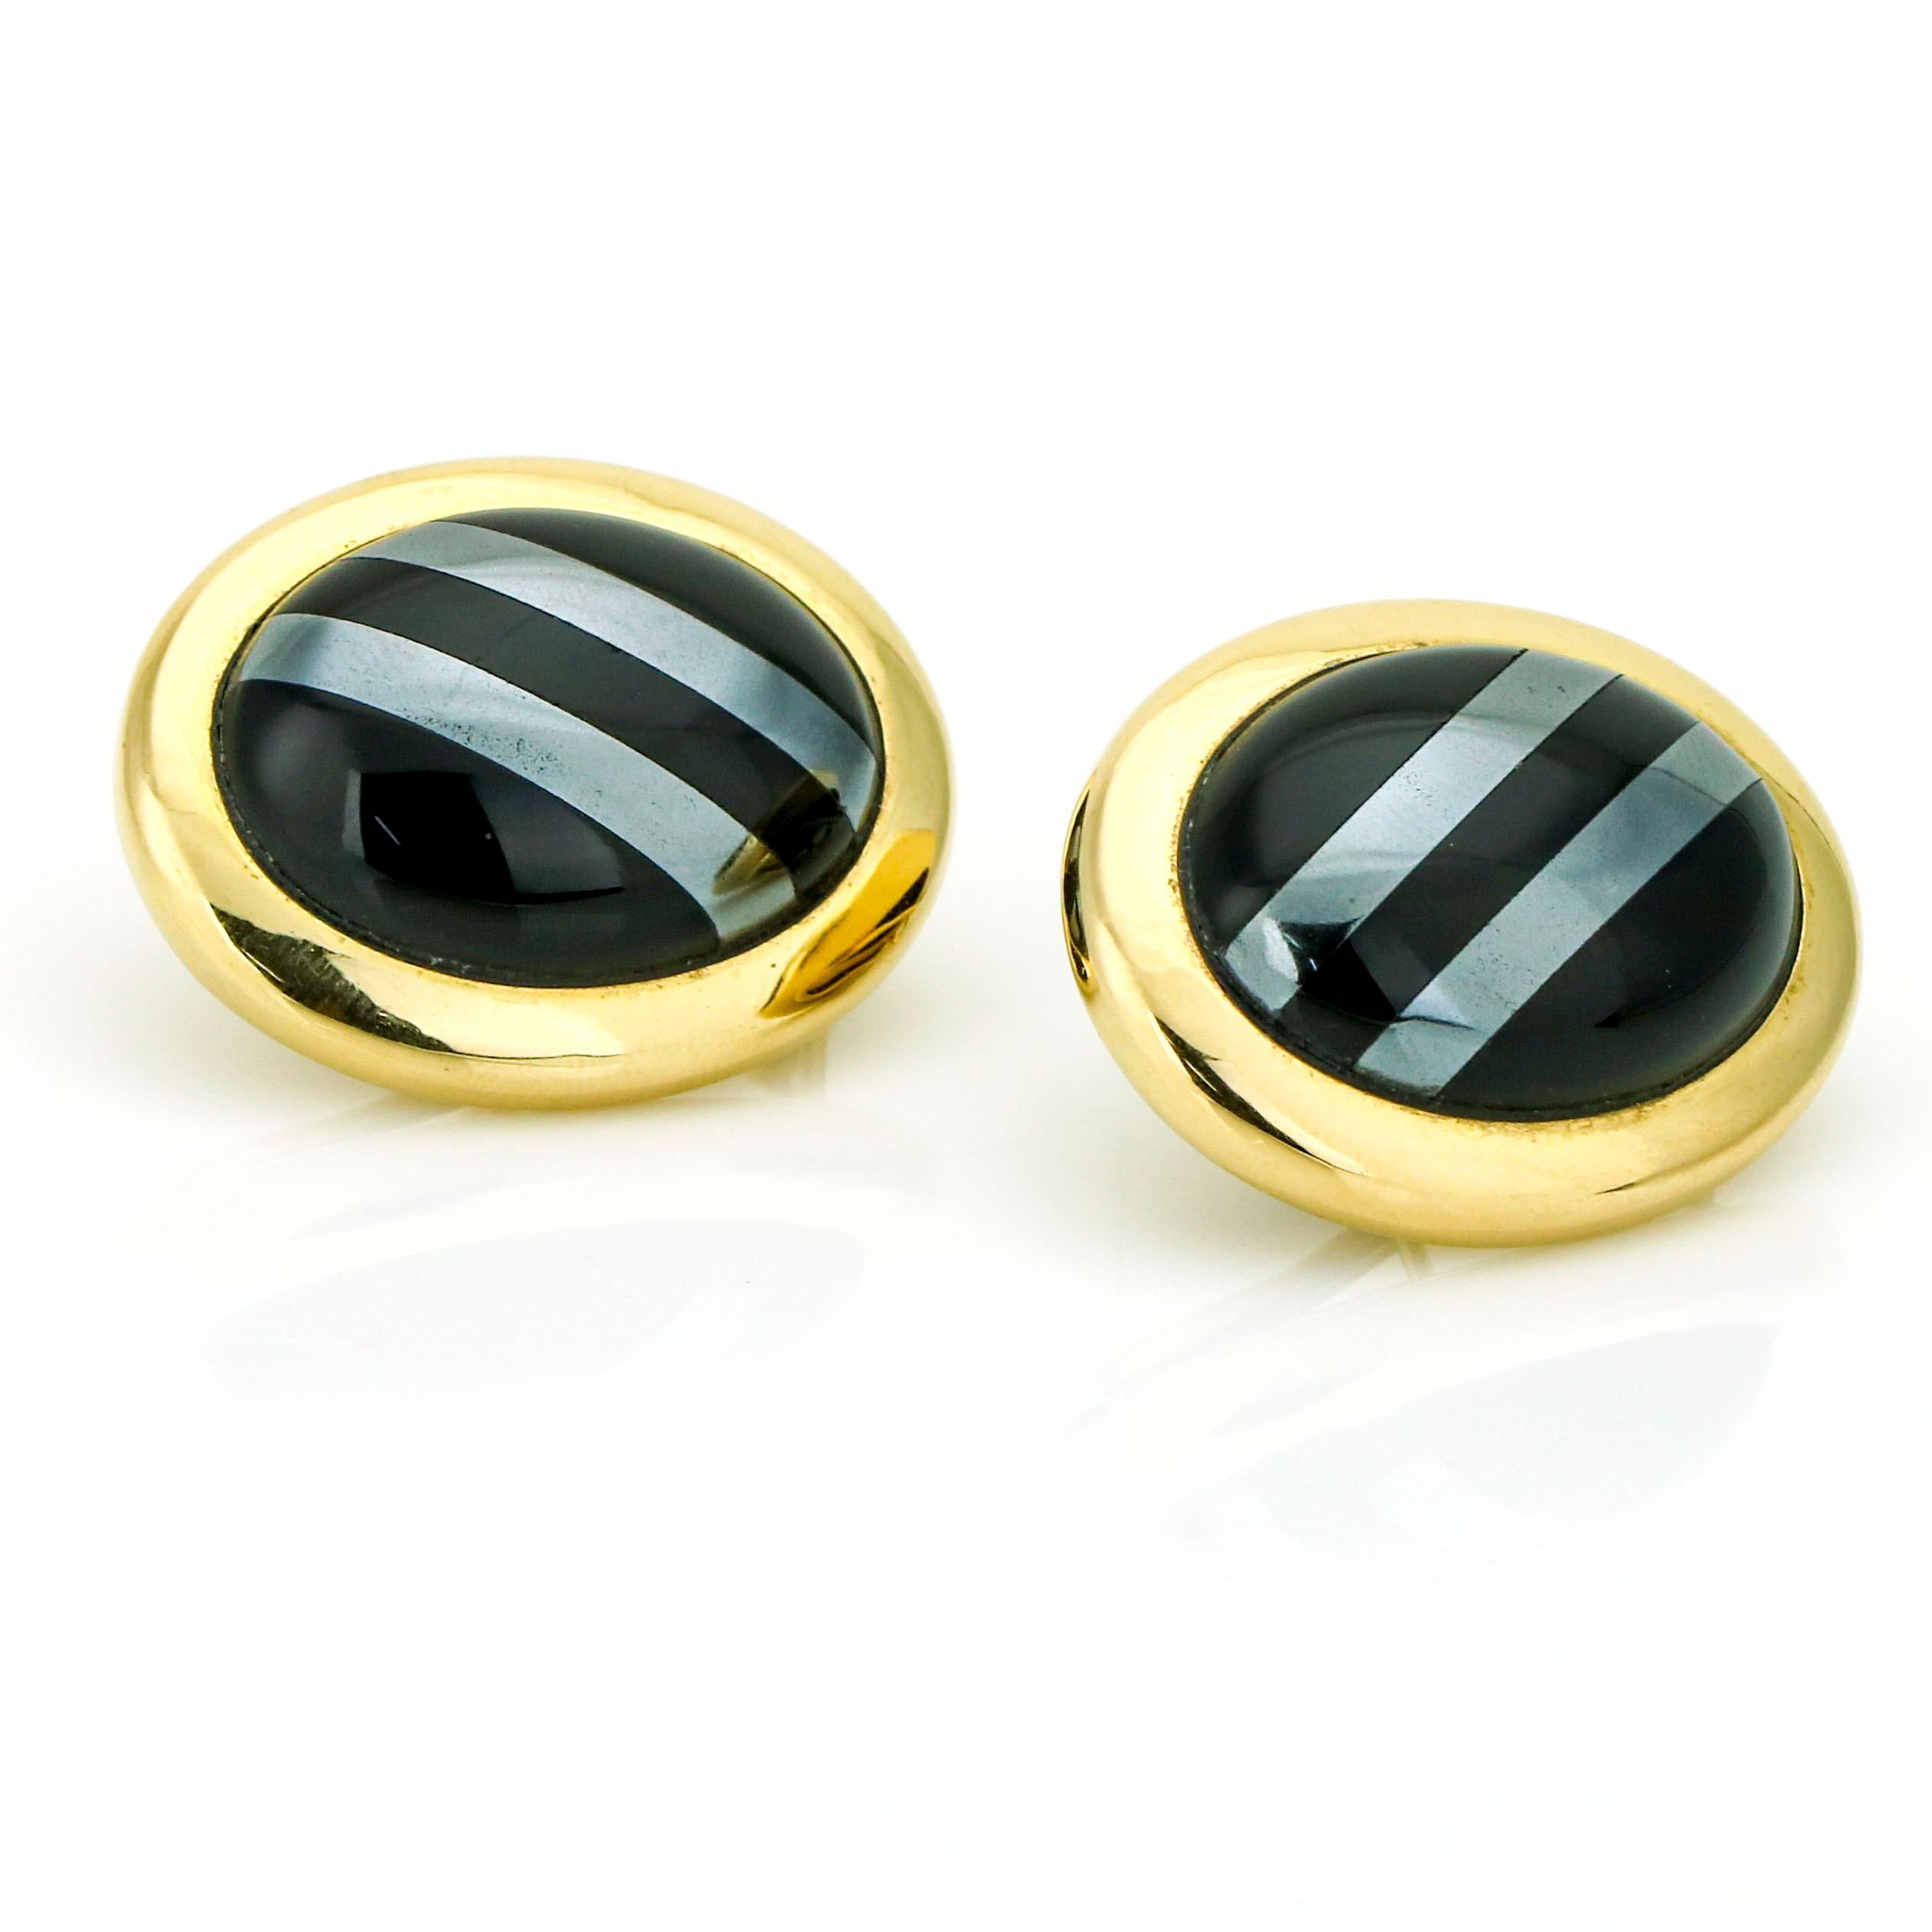 14 Karat Yellow Gold Onyx Hematite Retro Oval Stud Earrings In Excellent Condition For Sale In Fort Lauderdale, FL